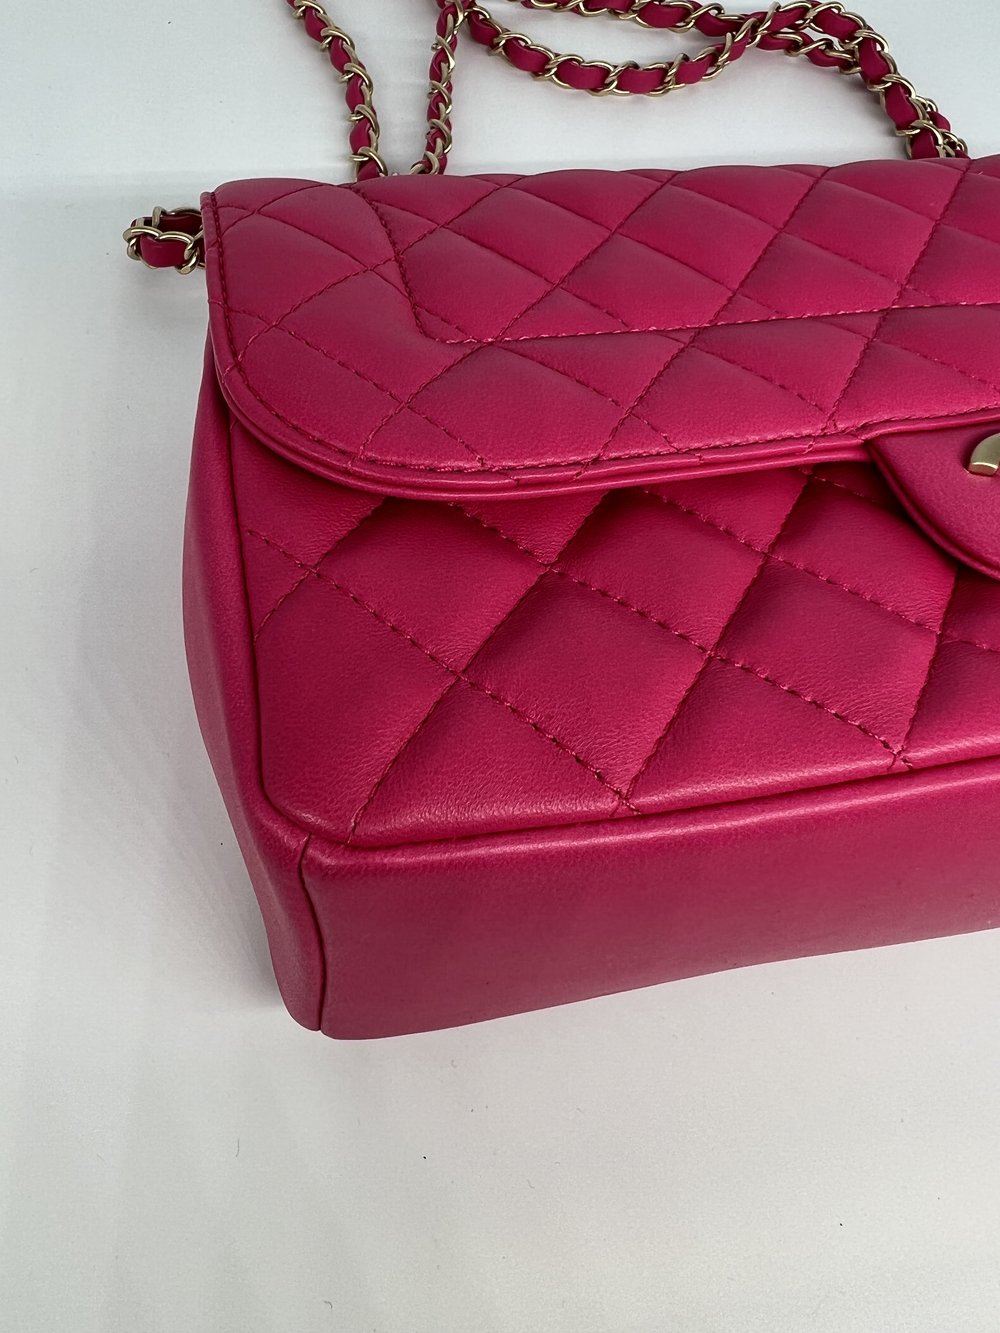 Chanel 2015 Diana Flap Bag Pink GHW - SOLD